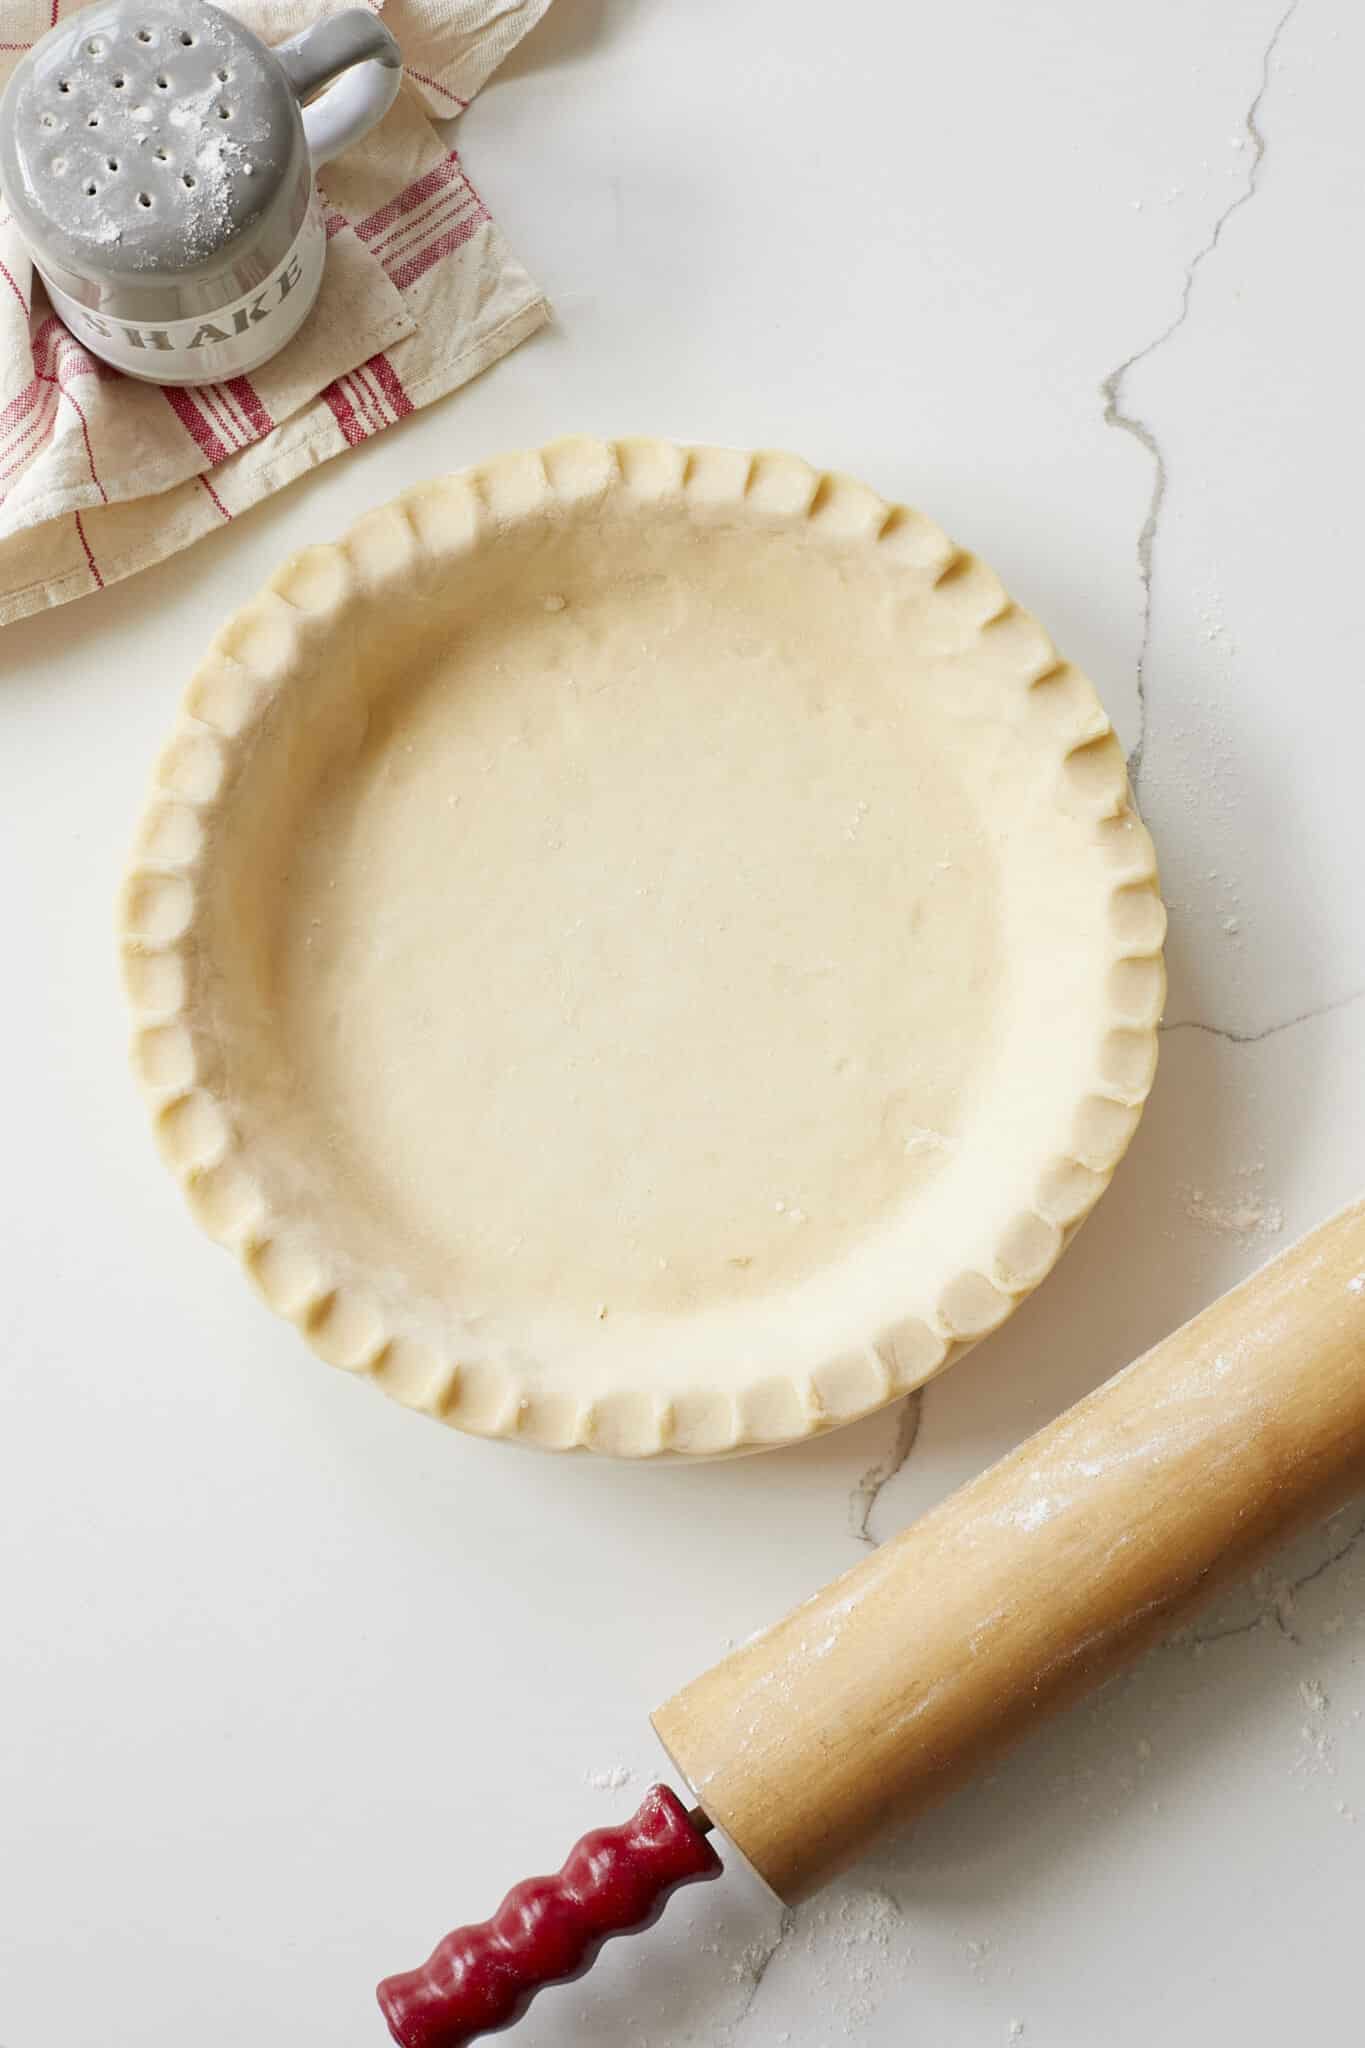 The Ballymaloe Creamed Butter Pie Crust is assembled into a pie pan with fluted edge. The flour shaker s in the top left corner, the wooden rolling pin with red handles is on the right side. 